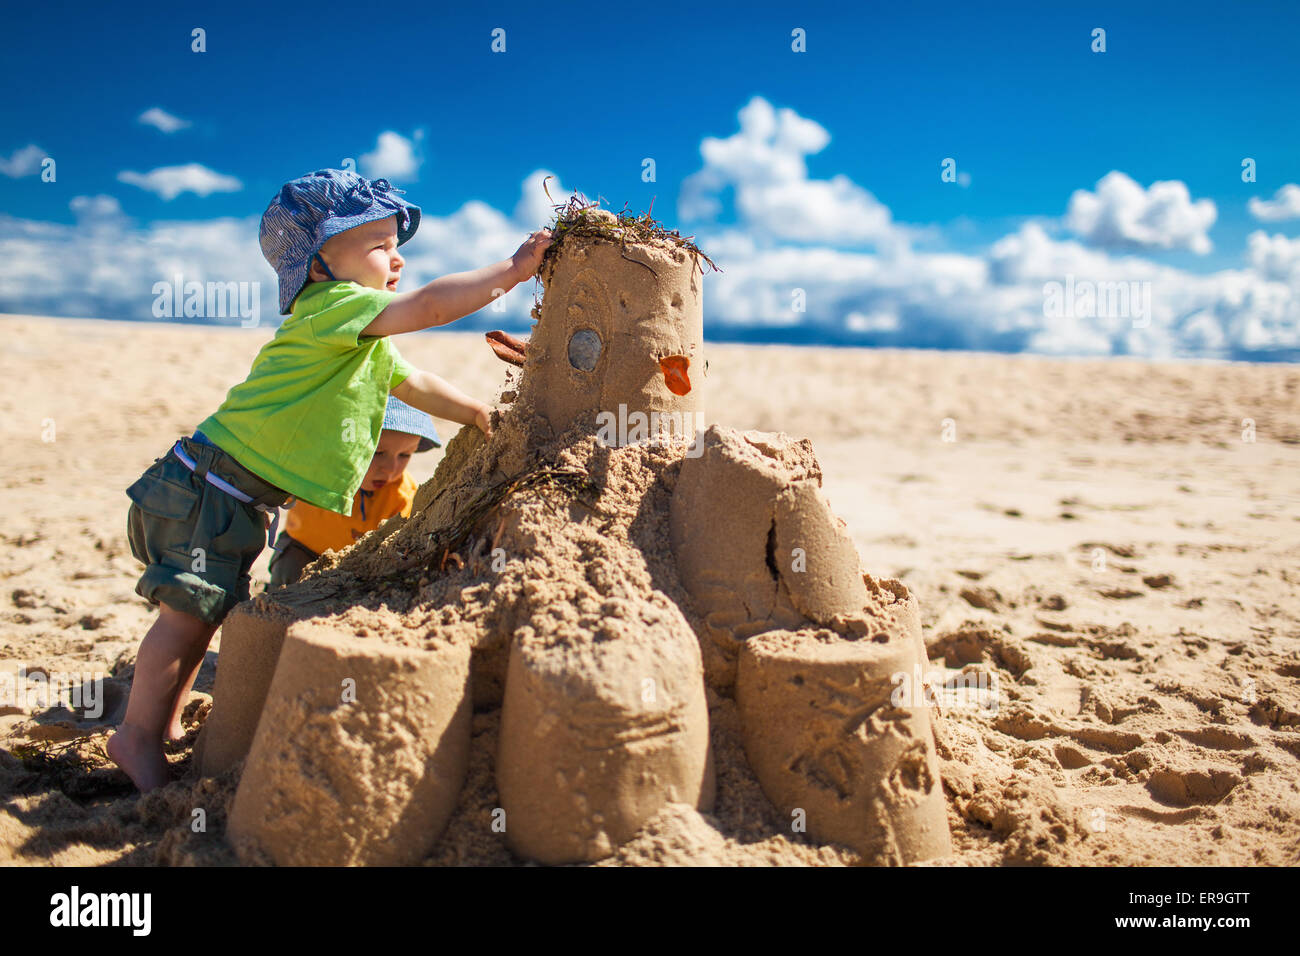 Two little boys in colorful t-shirts building large sandcastle on the beach Stock Photo